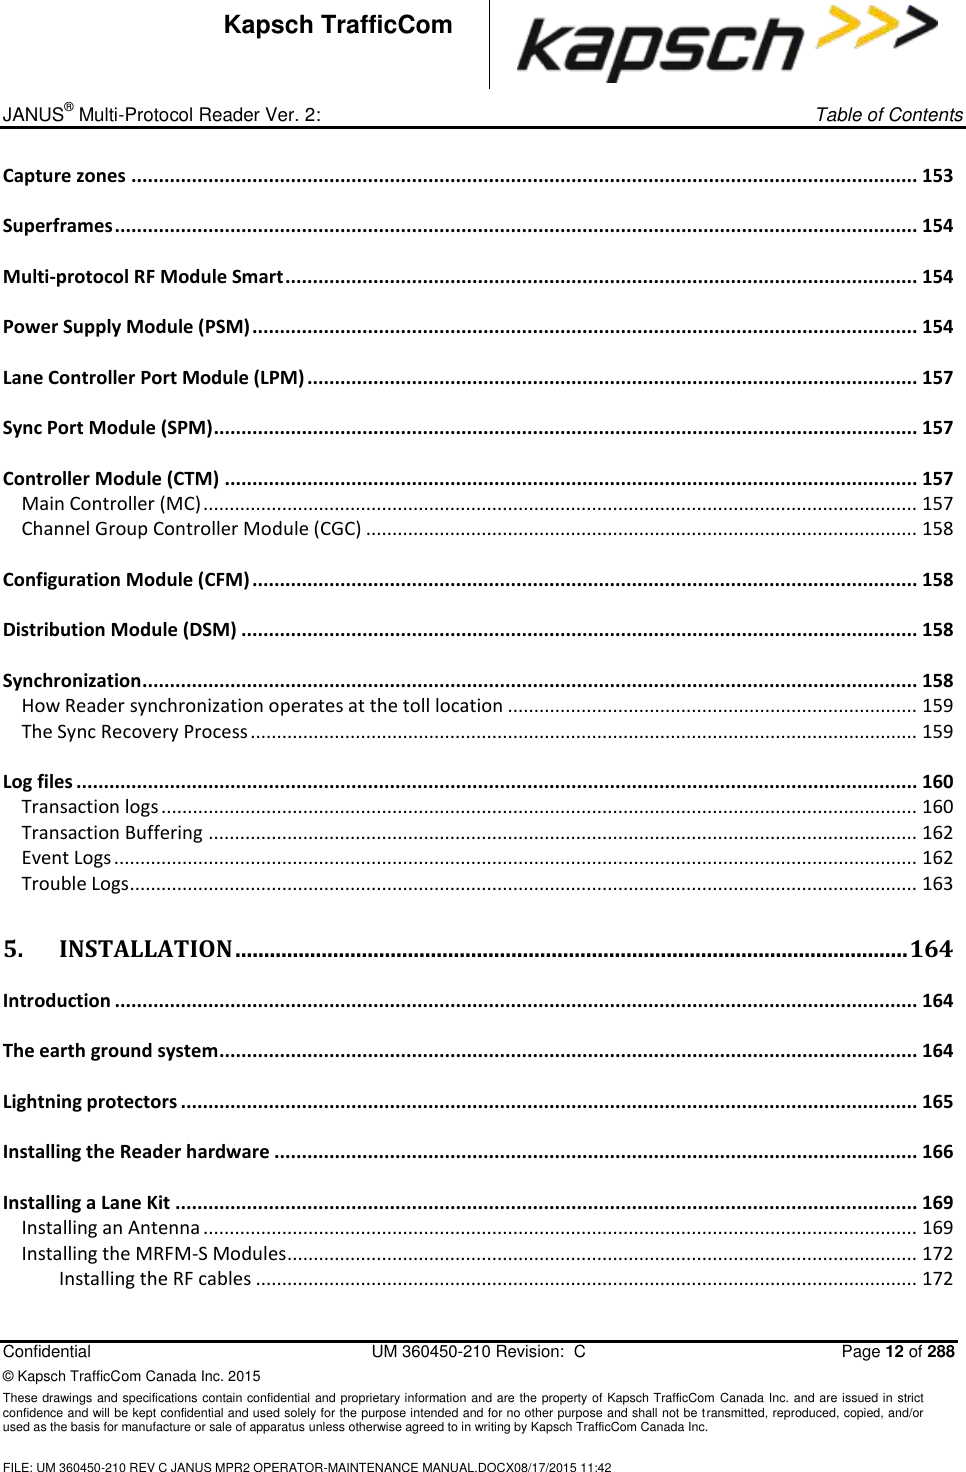 _ JANUS® Multi-Protocol Reader Ver. 2:     Table of Contents   Confidential  UM 360450-210 Revision:  C  Page 12 of 288 © Kapsch TrafficCom Canada Inc. 2015 These drawings and specifications contain confidential and proprietary information and are the property of Kapsch TrafficCom Canada Inc. and are issued in strict confidence and will be kept confidential and used solely for the purpose intended and for no other purpose and shall not be transmitted, reproduced, copied, and/or used as the basis for manufacture or sale of apparatus unless otherwise agreed to in writing by Kapsch TrafficCom Canada Inc.  FILE: UM 360450-210 REV C JANUS MPR2 OPERATOR-MAINTENANCE MANUAL.DOCX08/17/2015 11:42  Kapsch TrafficCom Capture zones ............................................................................................................................................... 153 Superframes .................................................................................................................................................. 154 Multi-protocol RF Module Smart ................................................................................................................... 154 Power Supply Module (PSM) ......................................................................................................................... 154 Lane Controller Port Module (LPM) ............................................................................................................... 157 Sync Port Module (SPM) ................................................................................................................................ 157 Controller Module (CTM) .............................................................................................................................. 157 Main Controller (MC) ........................................................................................................................................ 157 Channel Group Controller Module (CGC) ......................................................................................................... 158 Configuration Module (CFM) ......................................................................................................................... 158 Distribution Module (DSM) ........................................................................................................................... 158 Synchronization ............................................................................................................................................. 158 How Reader synchronization operates at the toll location .............................................................................. 159 The Sync Recovery Process ............................................................................................................................... 159 Log files ......................................................................................................................................................... 160 Transaction logs ................................................................................................................................................ 160 Transaction Buffering ....................................................................................................................................... 162 Event Logs ......................................................................................................................................................... 162 Trouble Logs ...................................................................................................................................................... 163 5. INSTALLATION ..................................................................................................................... 164 Introduction .................................................................................................................................................. 164 The earth ground system ............................................................................................................................... 164 Lightning protectors ...................................................................................................................................... 165 Installing the Reader hardware ..................................................................................................................... 166 Installing a Lane Kit ....................................................................................................................................... 169 Installing an Antenna ........................................................................................................................................ 169 Installing the MRFM-S Modules ........................................................................................................................ 172 Installing the RF cables .............................................................................................................................. 172 